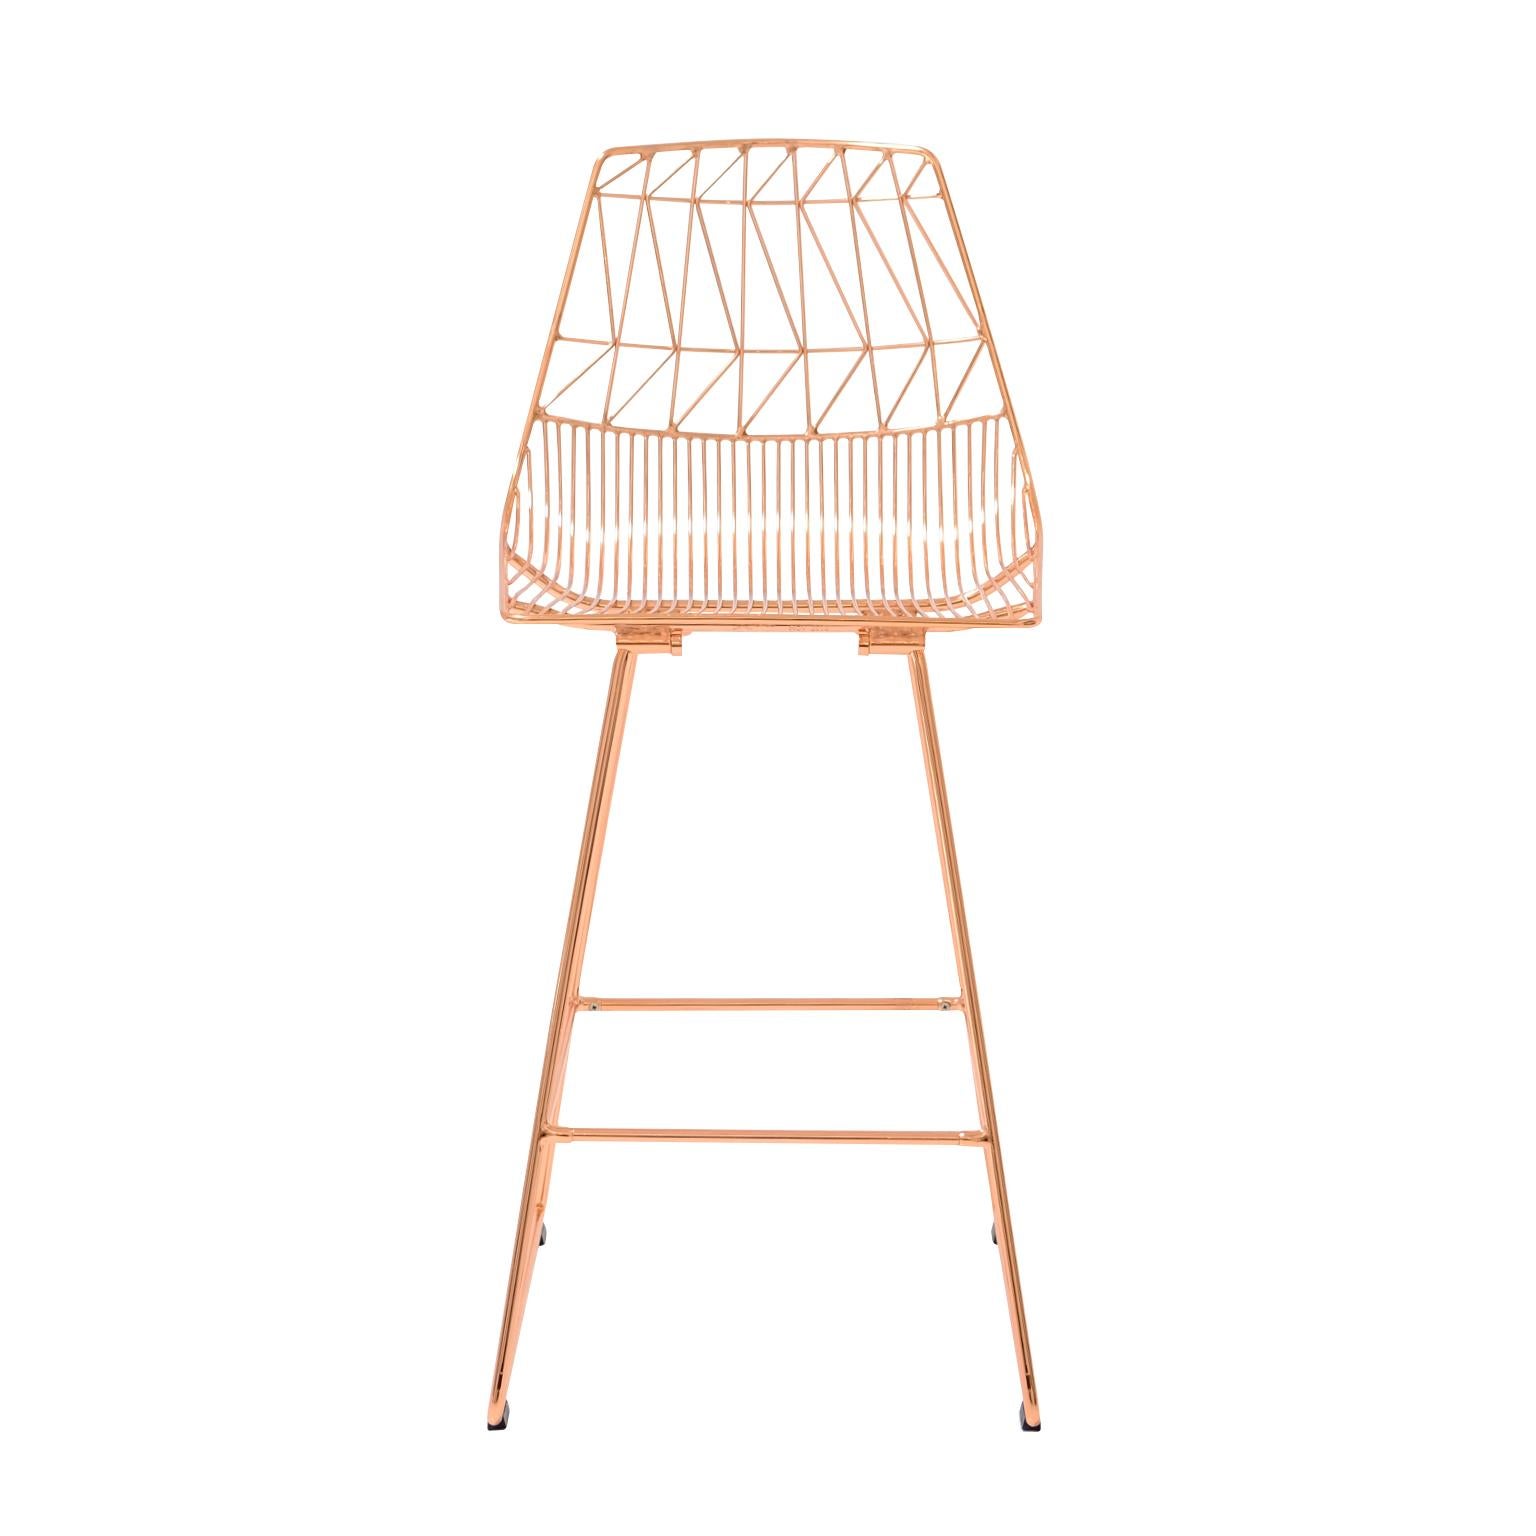 Modern Wire "Lucy" Counter Stool by Bend Goods